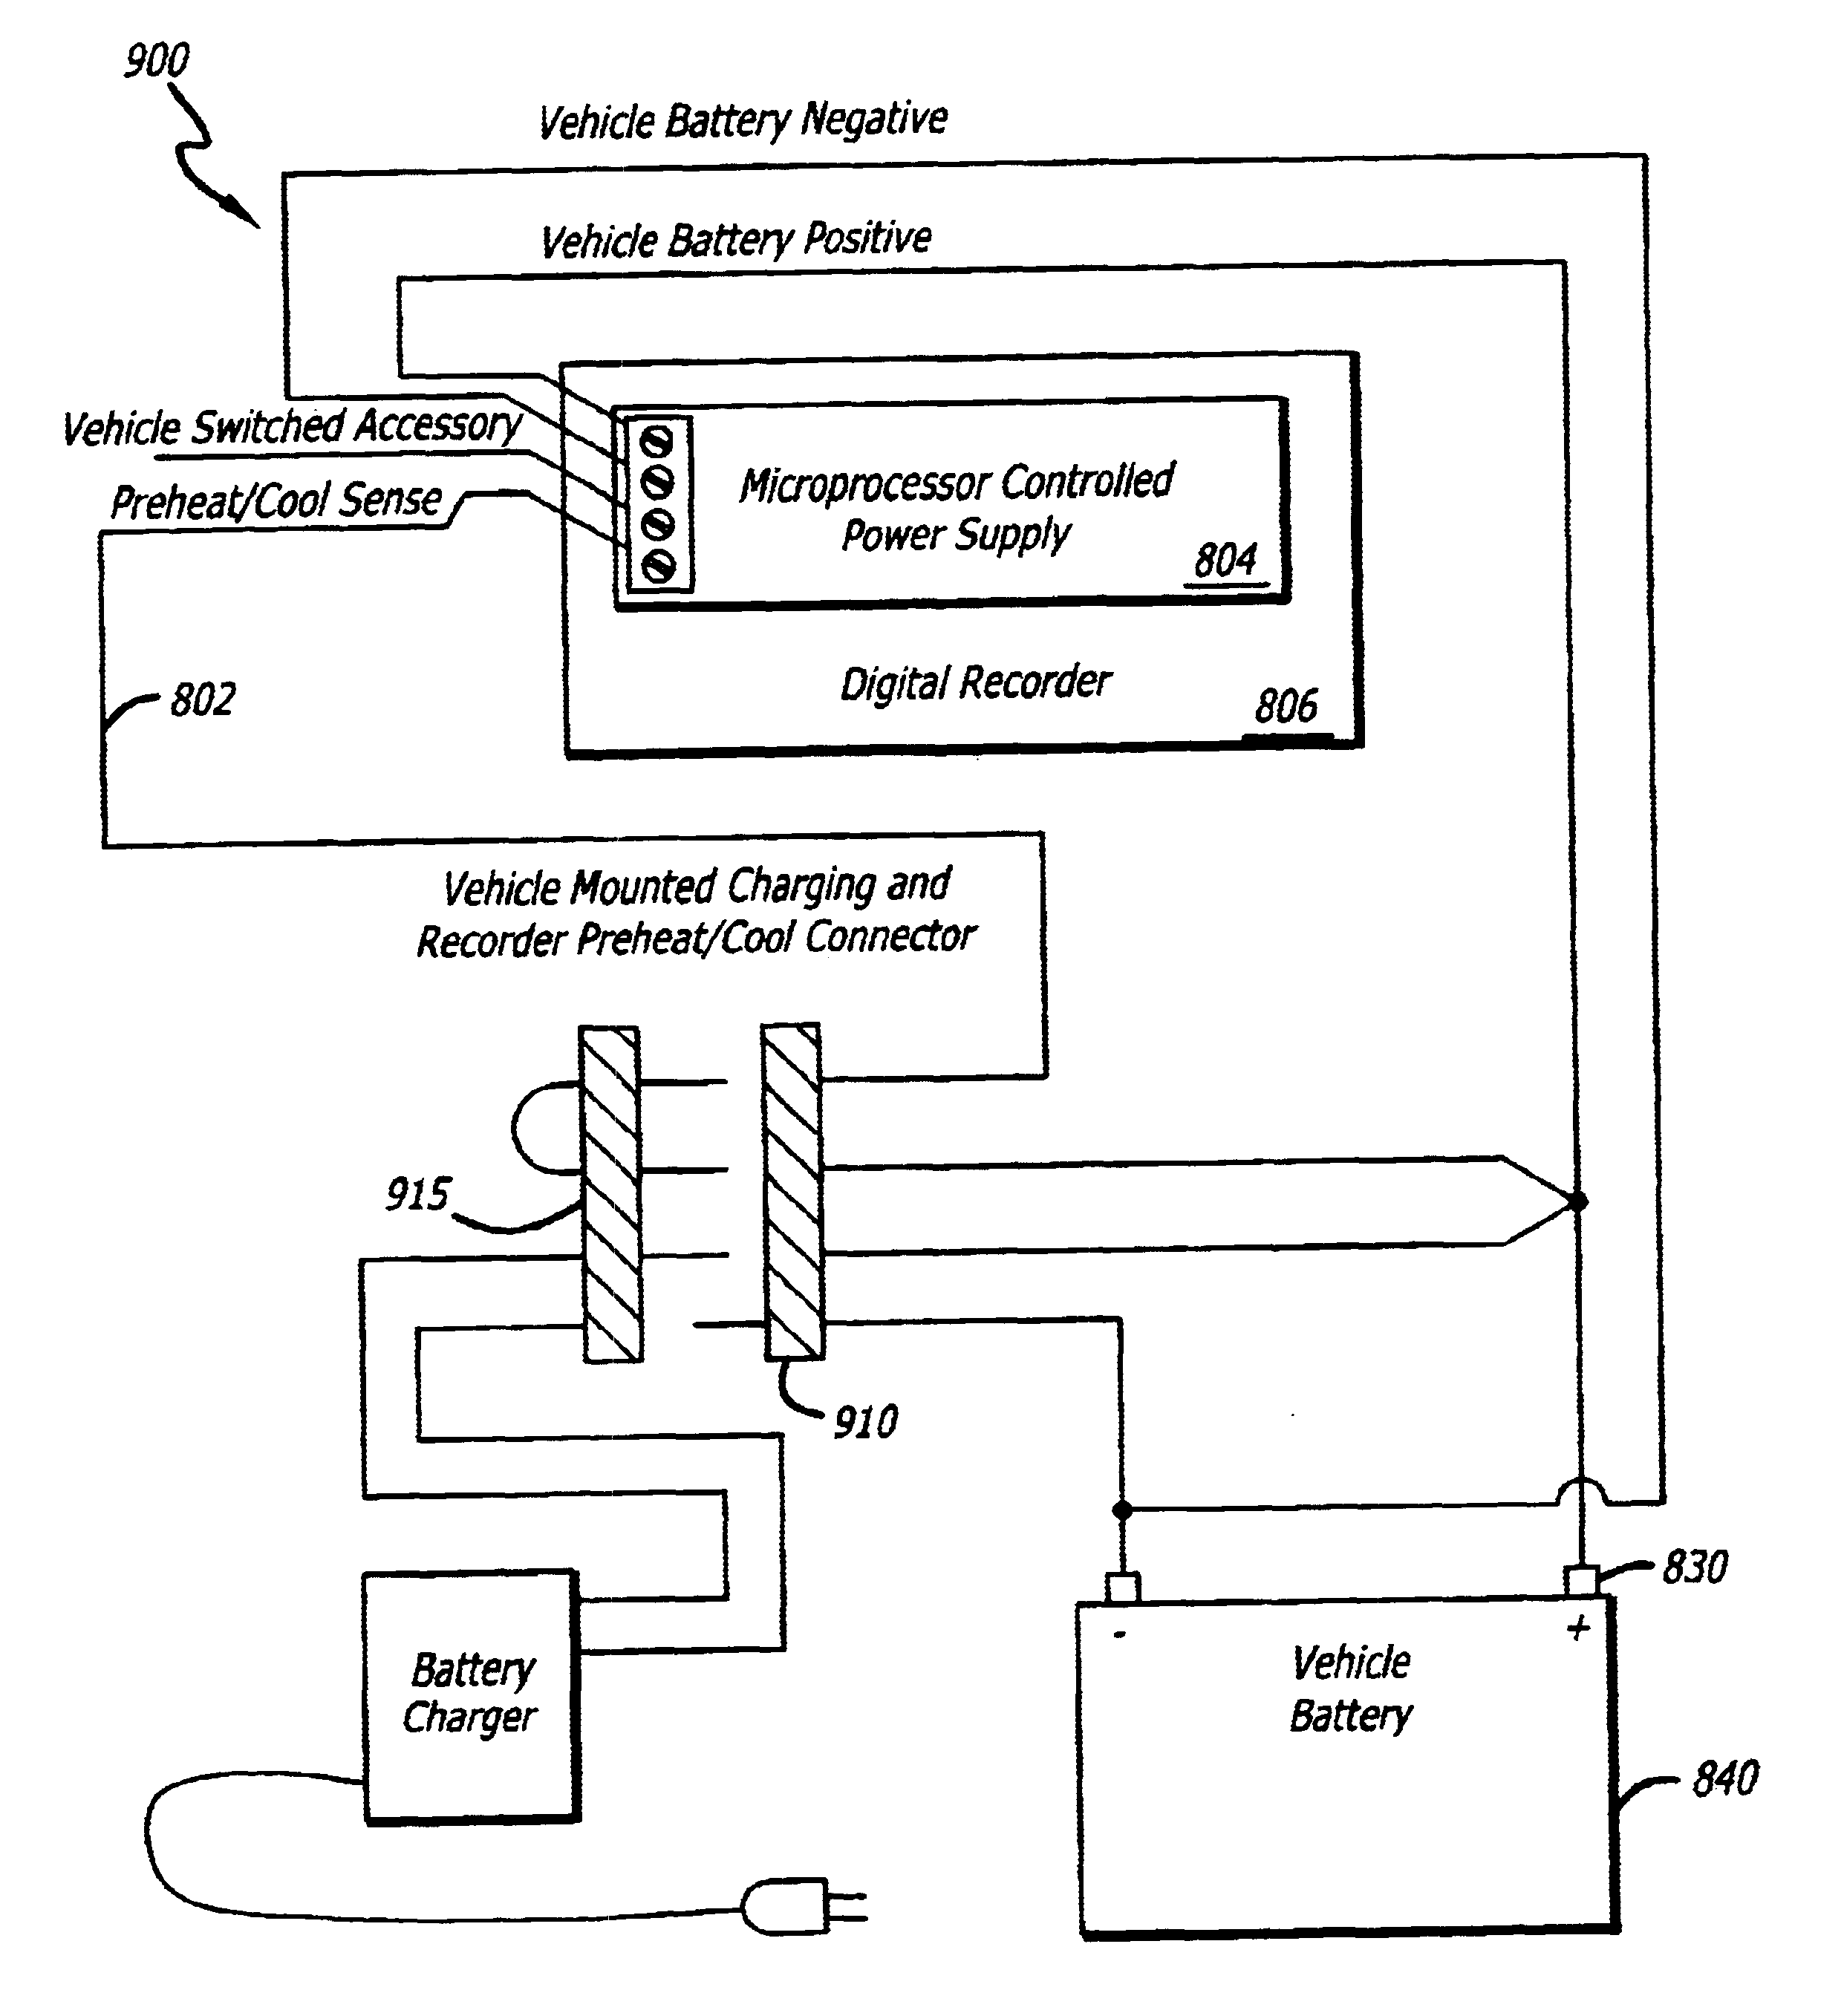 Sensing vehicle battery charging and/or engine block heating to trigger pre-heating of a mobile electronic device